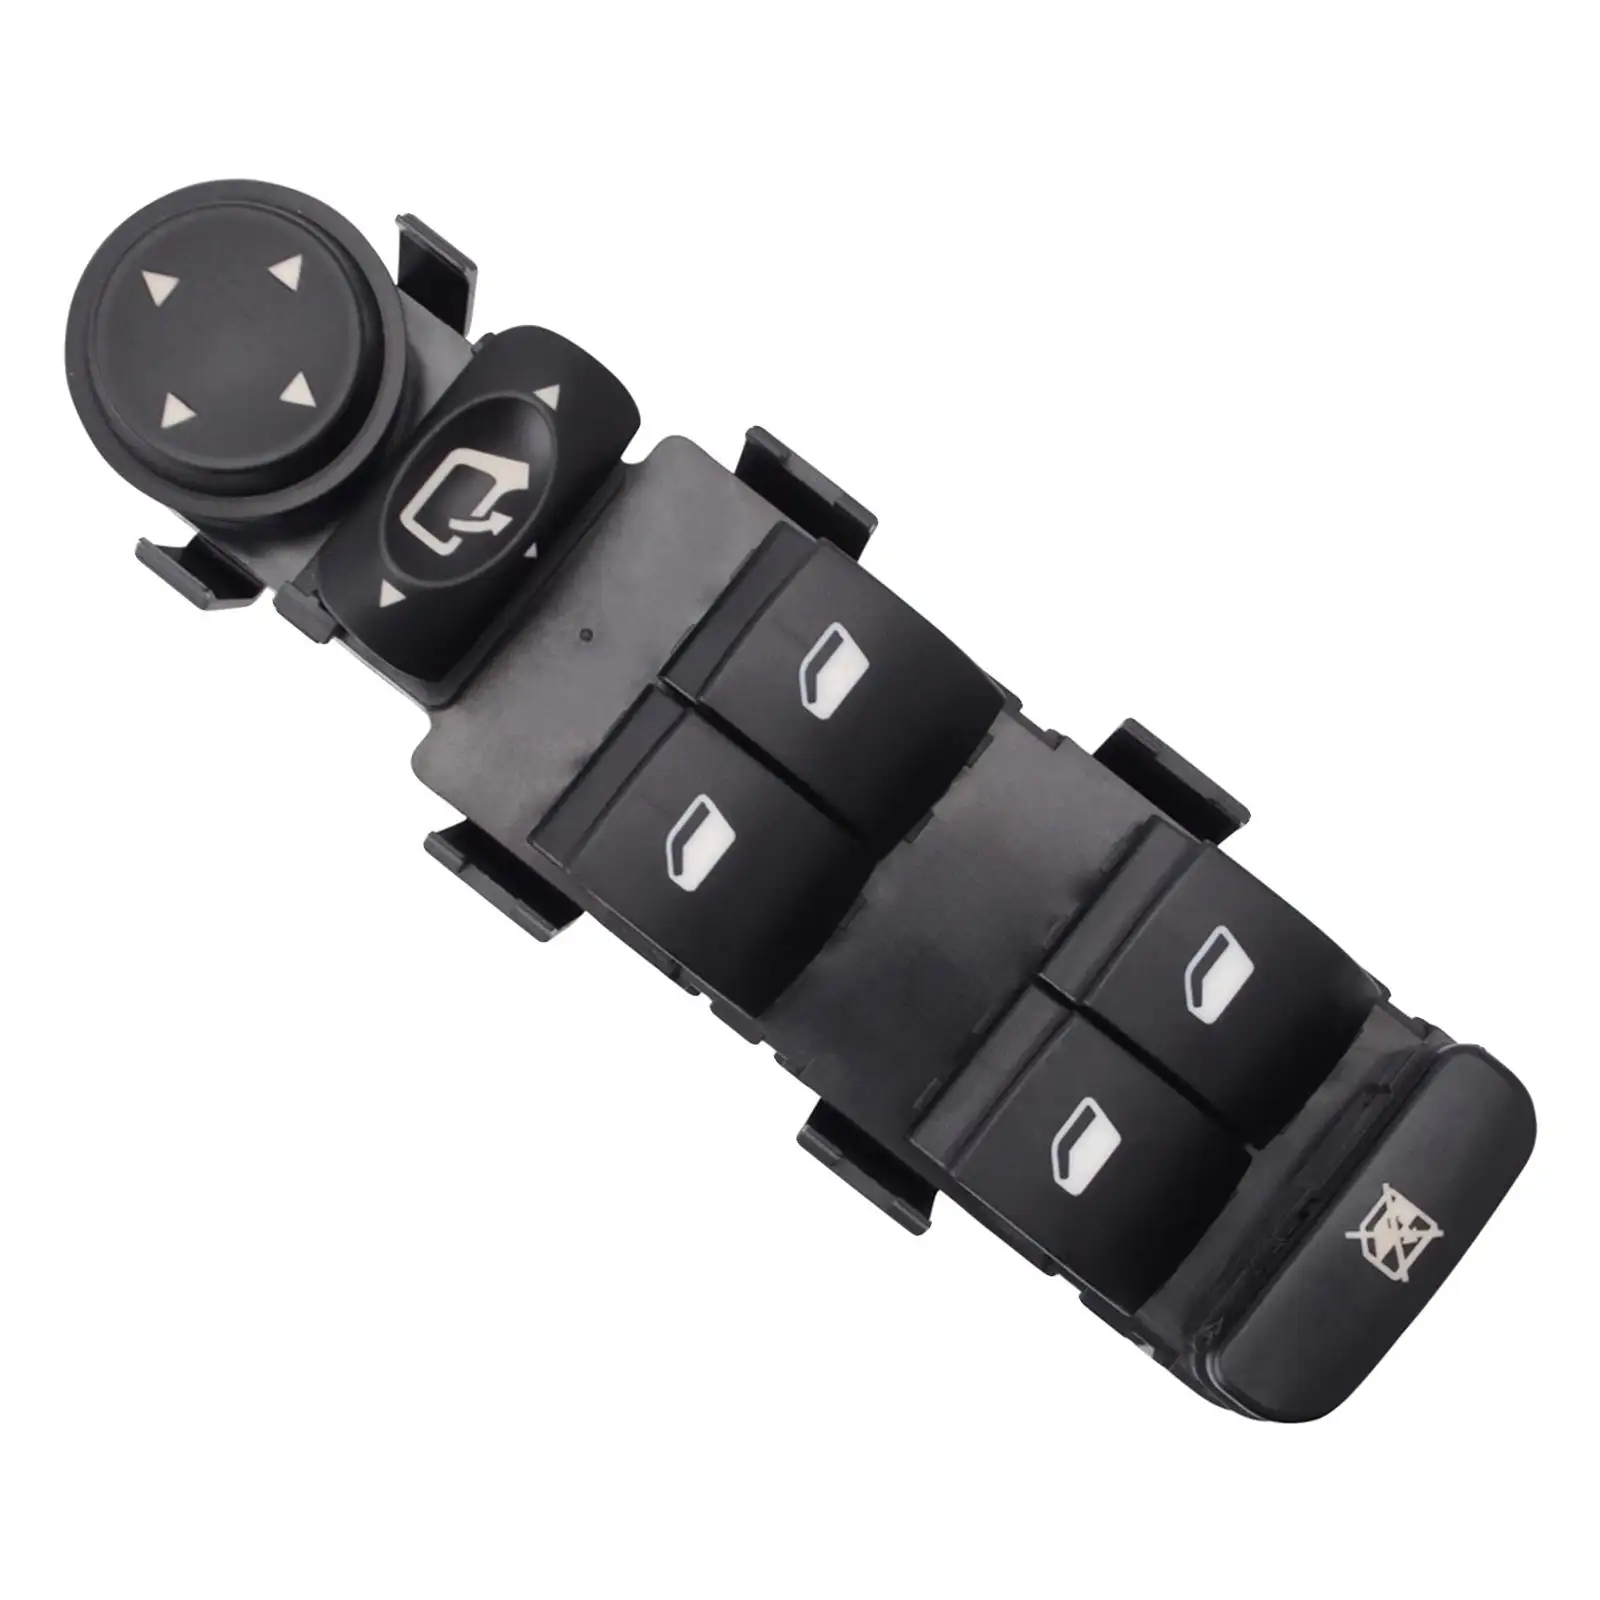 Automobile Power Window Switch 6554.He Fit for Citroen C4 2004-2010 Easy to Install Replacement Accessories Professional